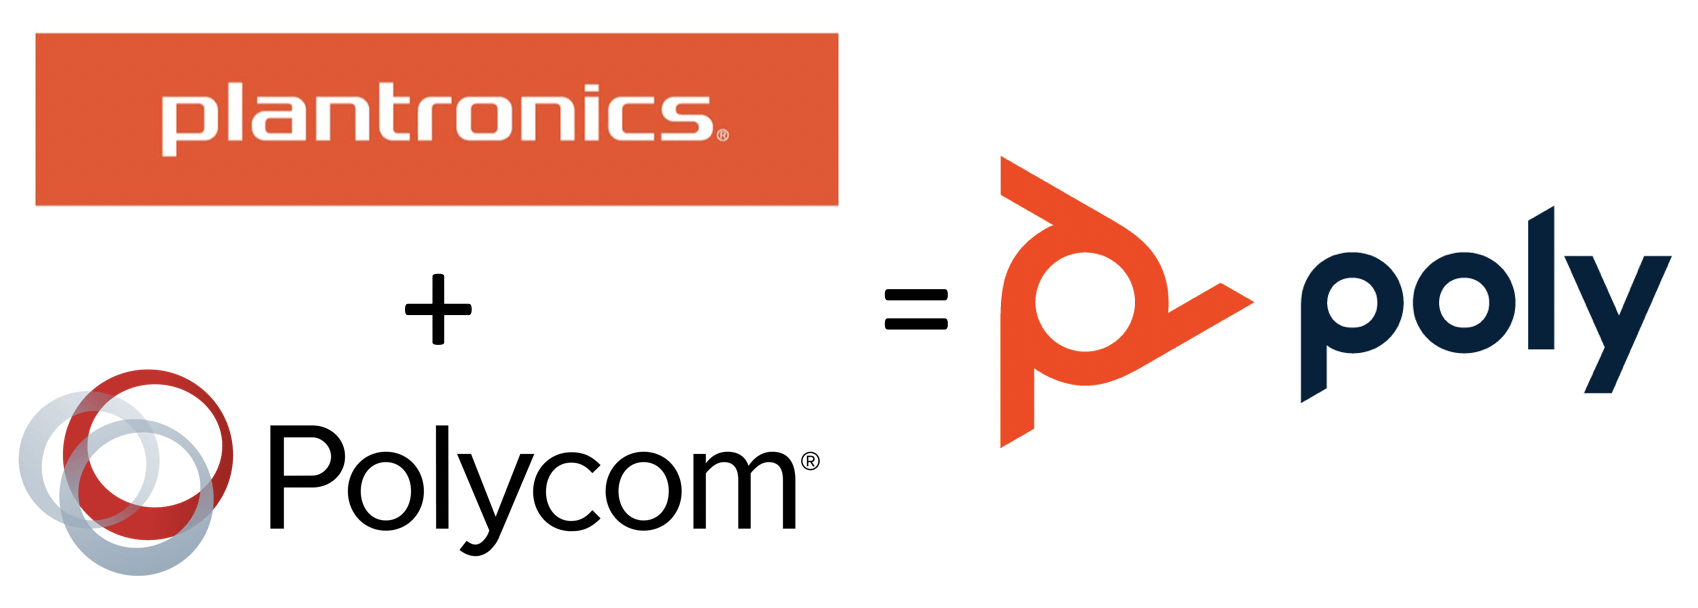 Recon Research - Poly Enters the Scene (Plantronics + Polycom = Poly)